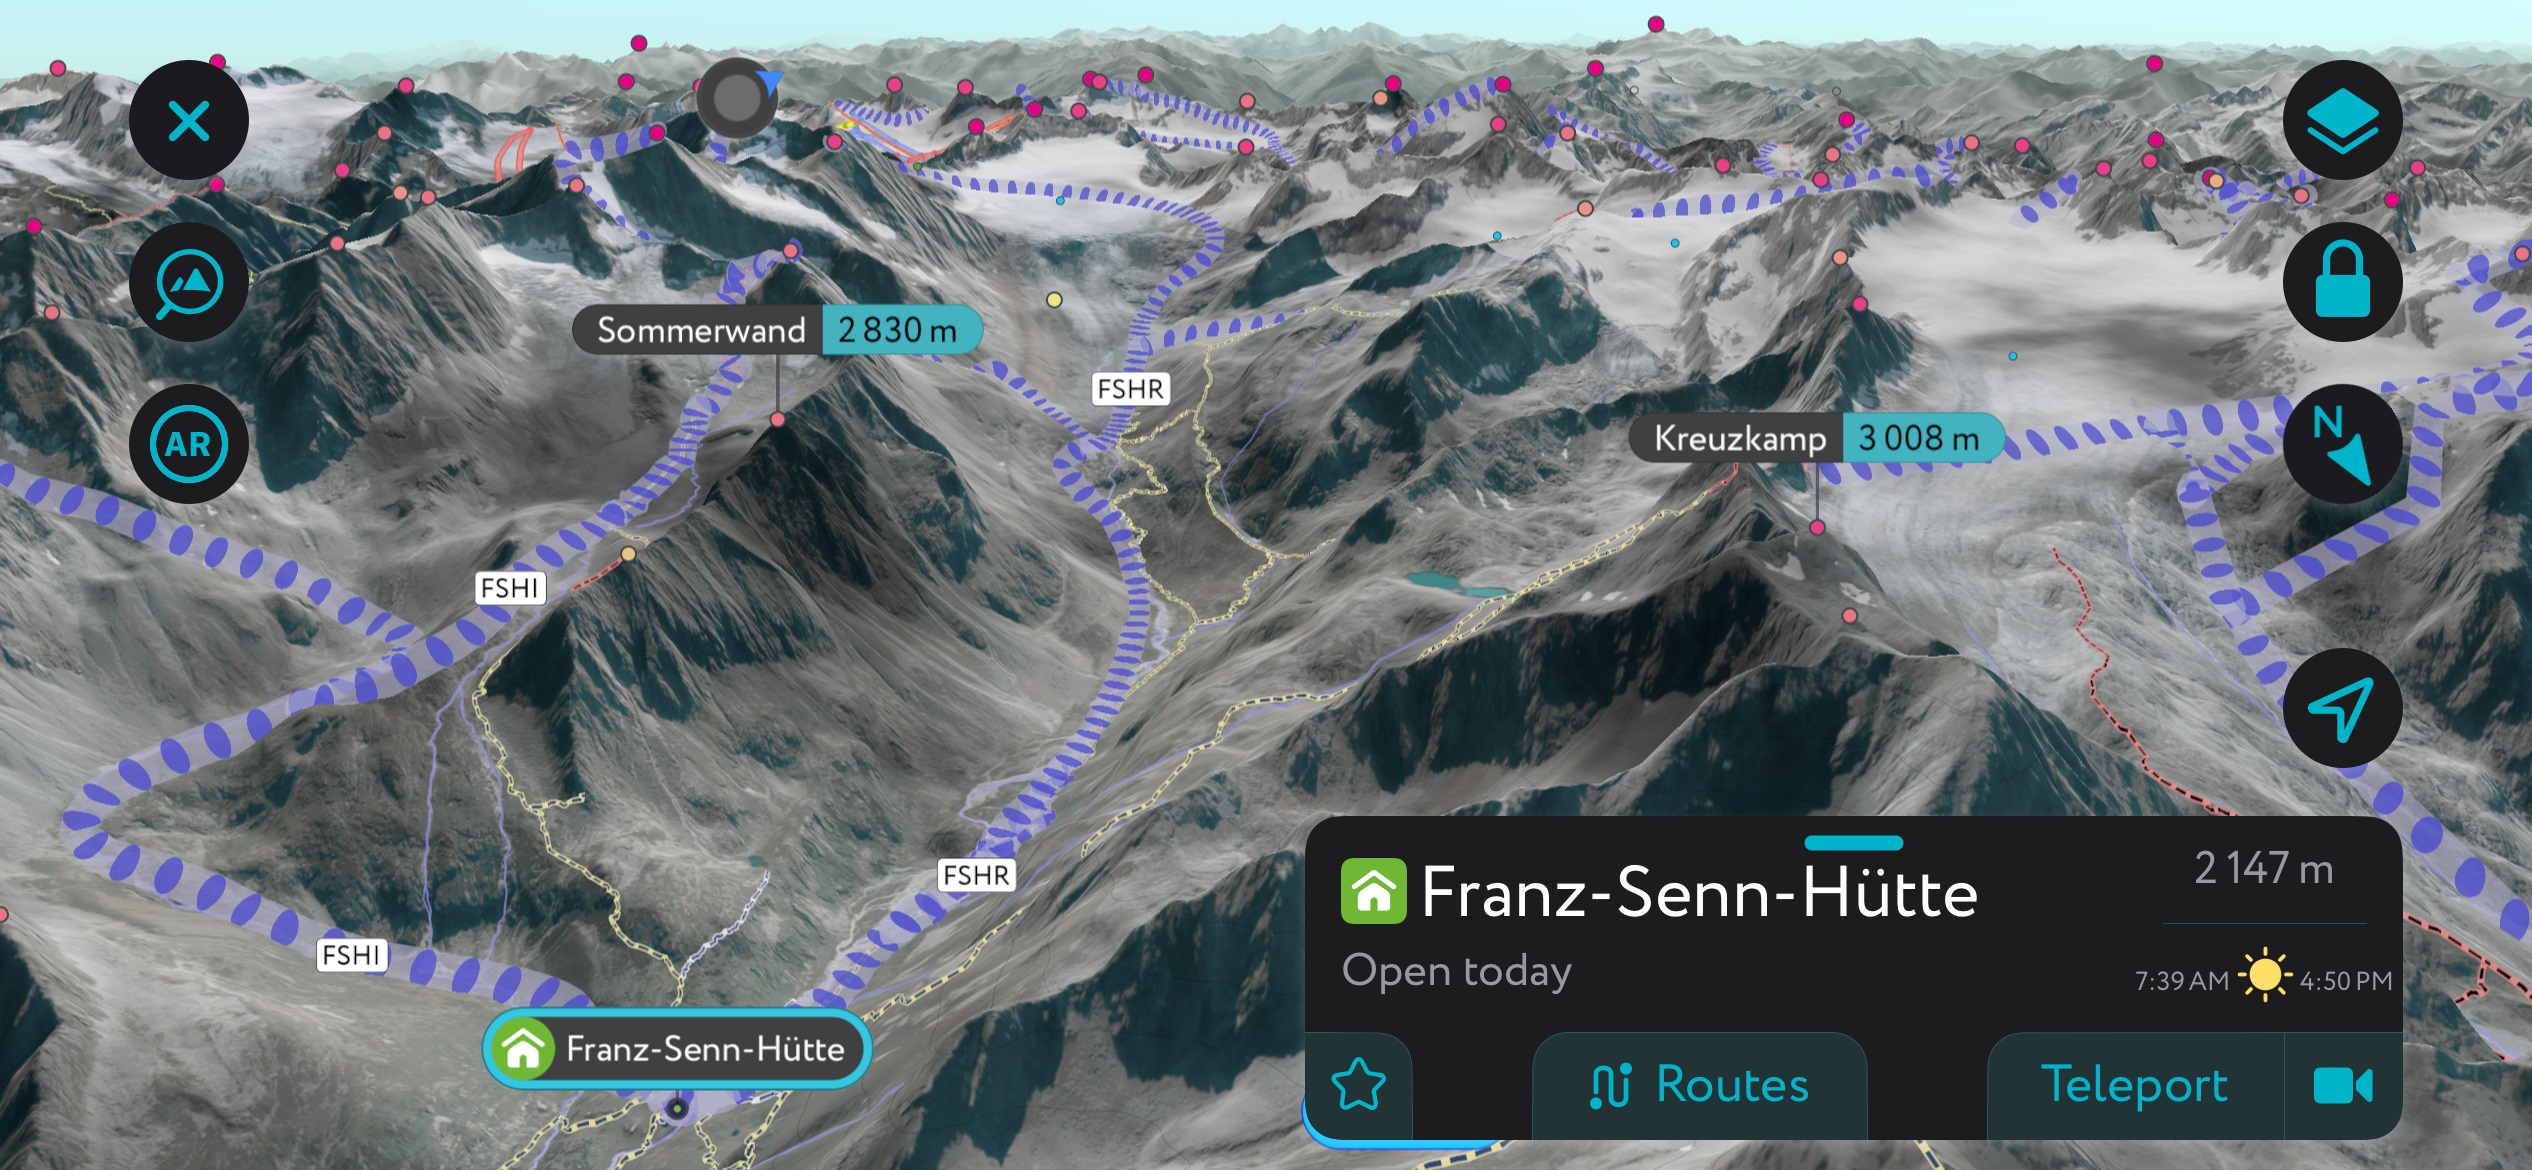 Terrain accessible from the Franz Senn Hut on PeakVisor’s mobile app. The App includes most huts in the Alps, as well as information and scheduling. Stubai Alps